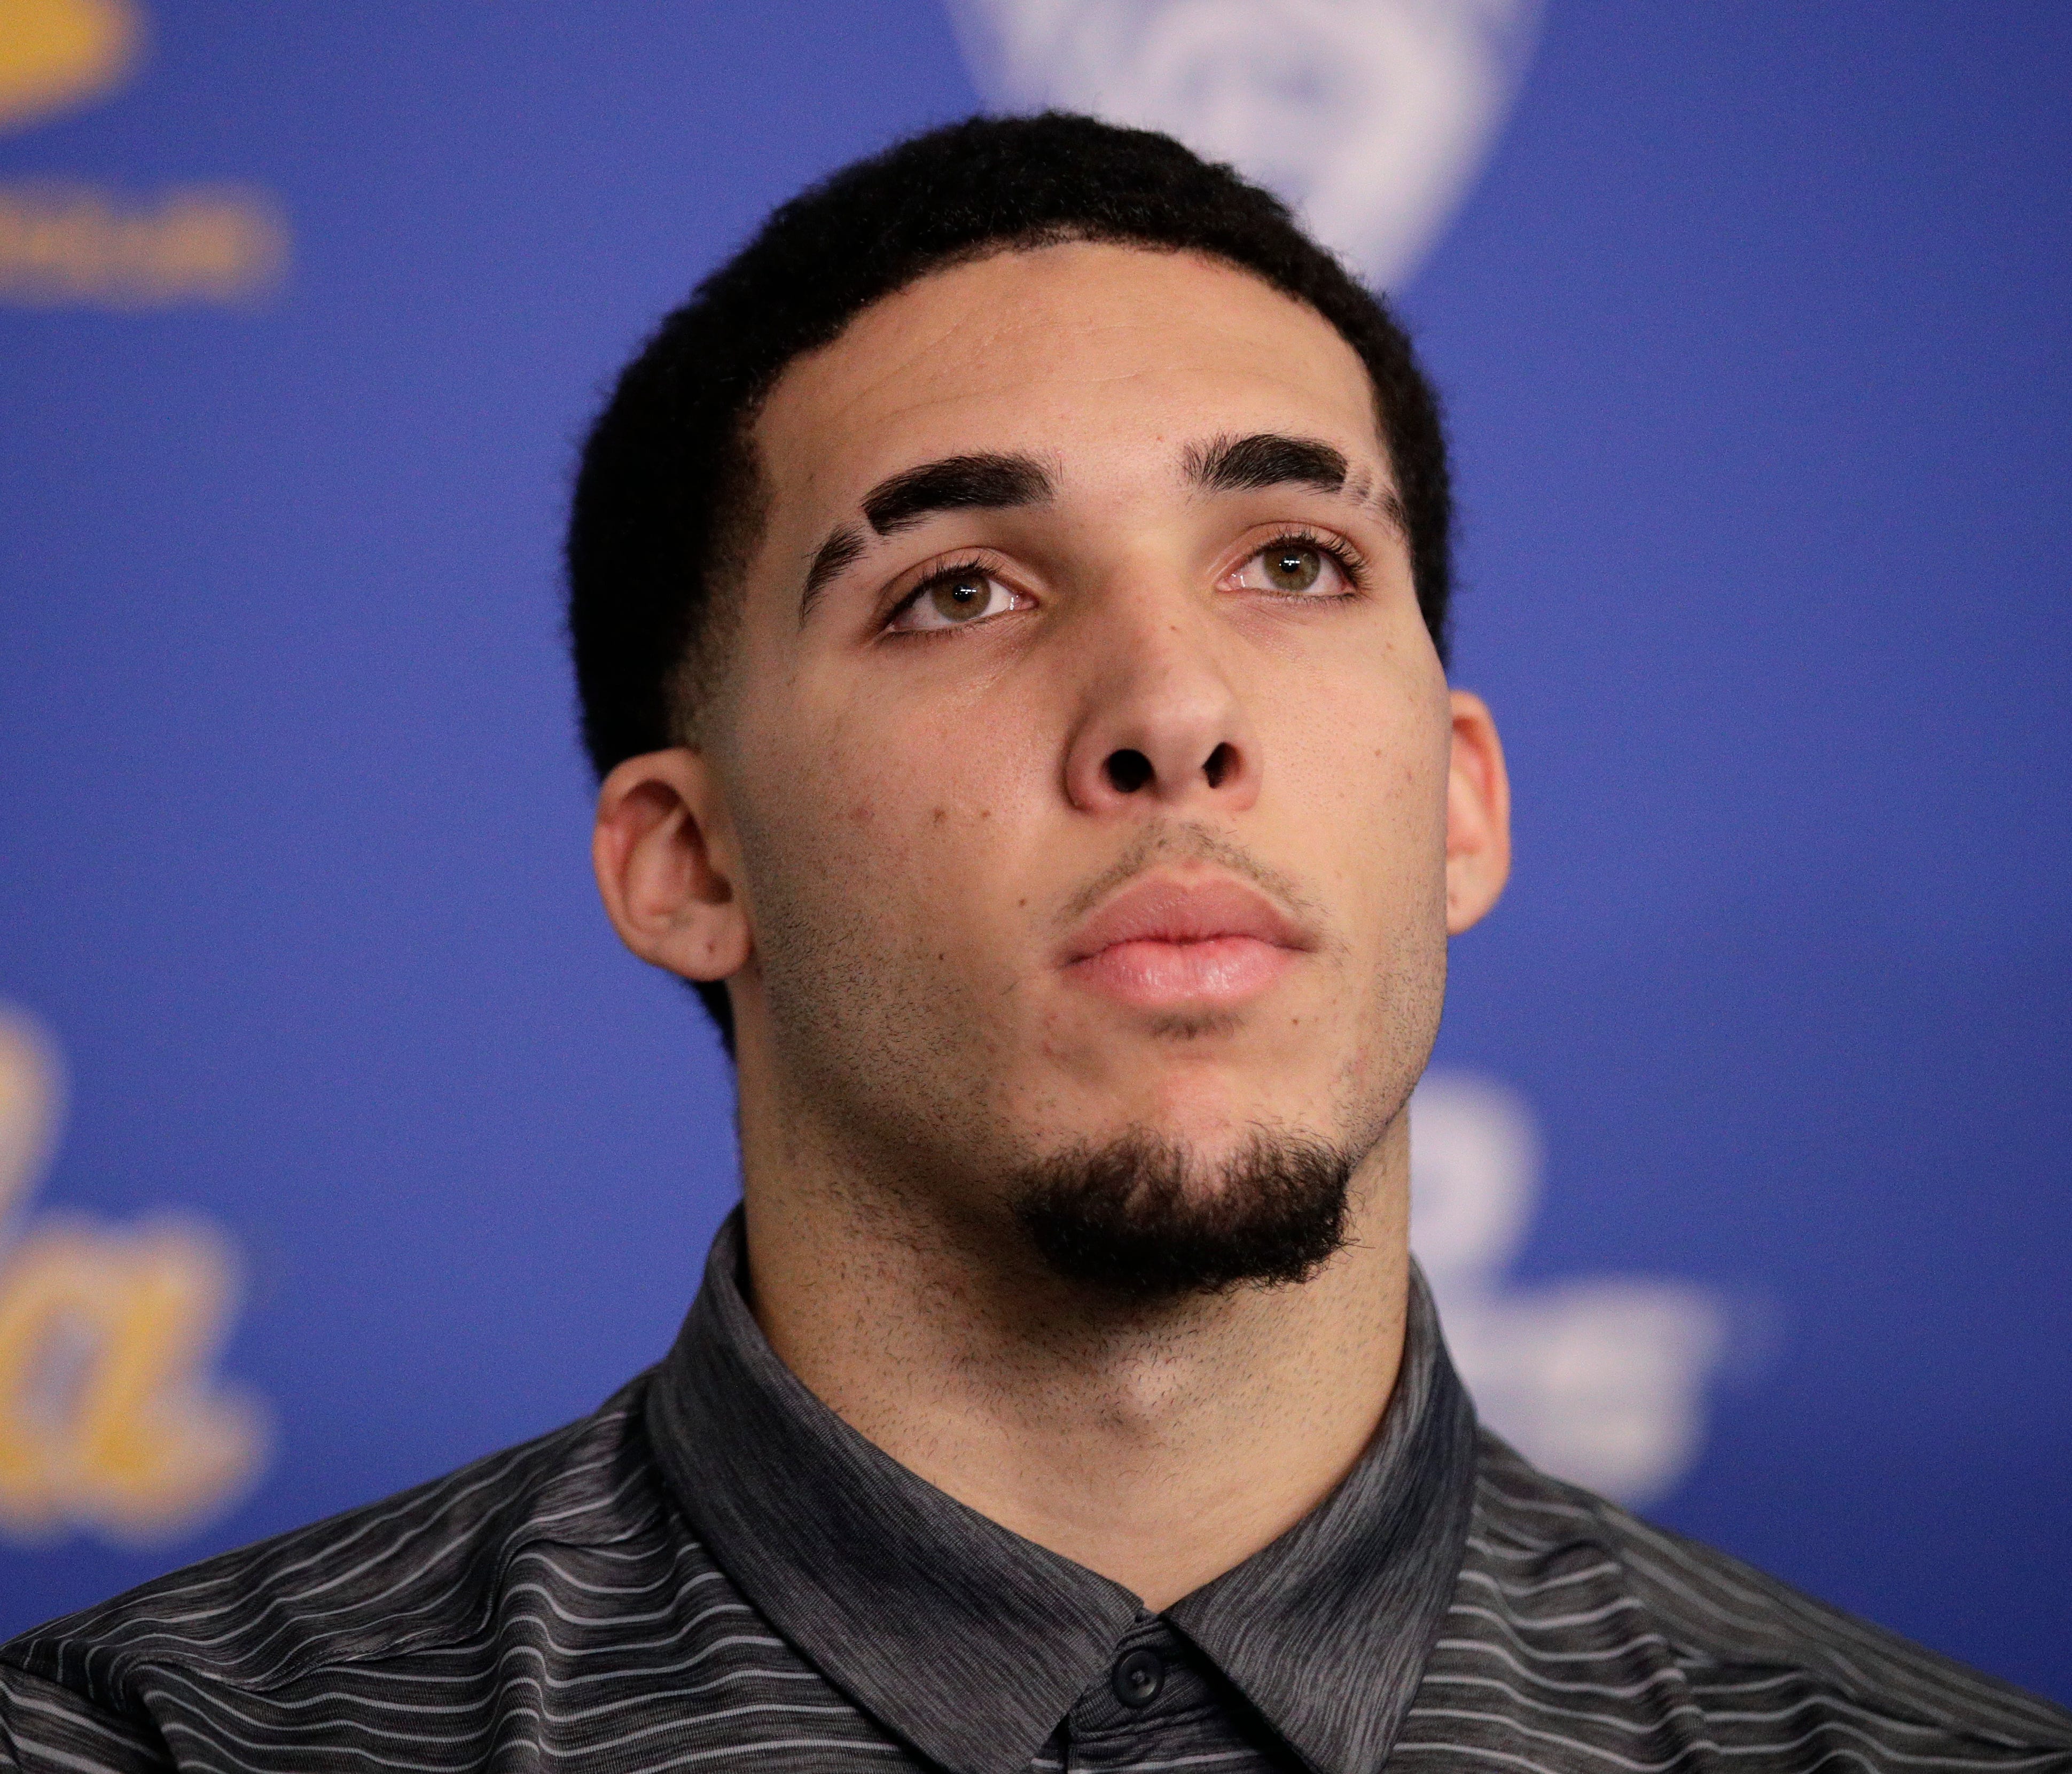 FILe -In this Wednesday, Nov. 15, 2017, file photo, UCLA NCAA college basketball player LiAngelo Ball attends a news conference at UCLA in Los Angeles. The father of UCLA guard LiAngelo Ball says he's withdrawing his son from school so he can prepare